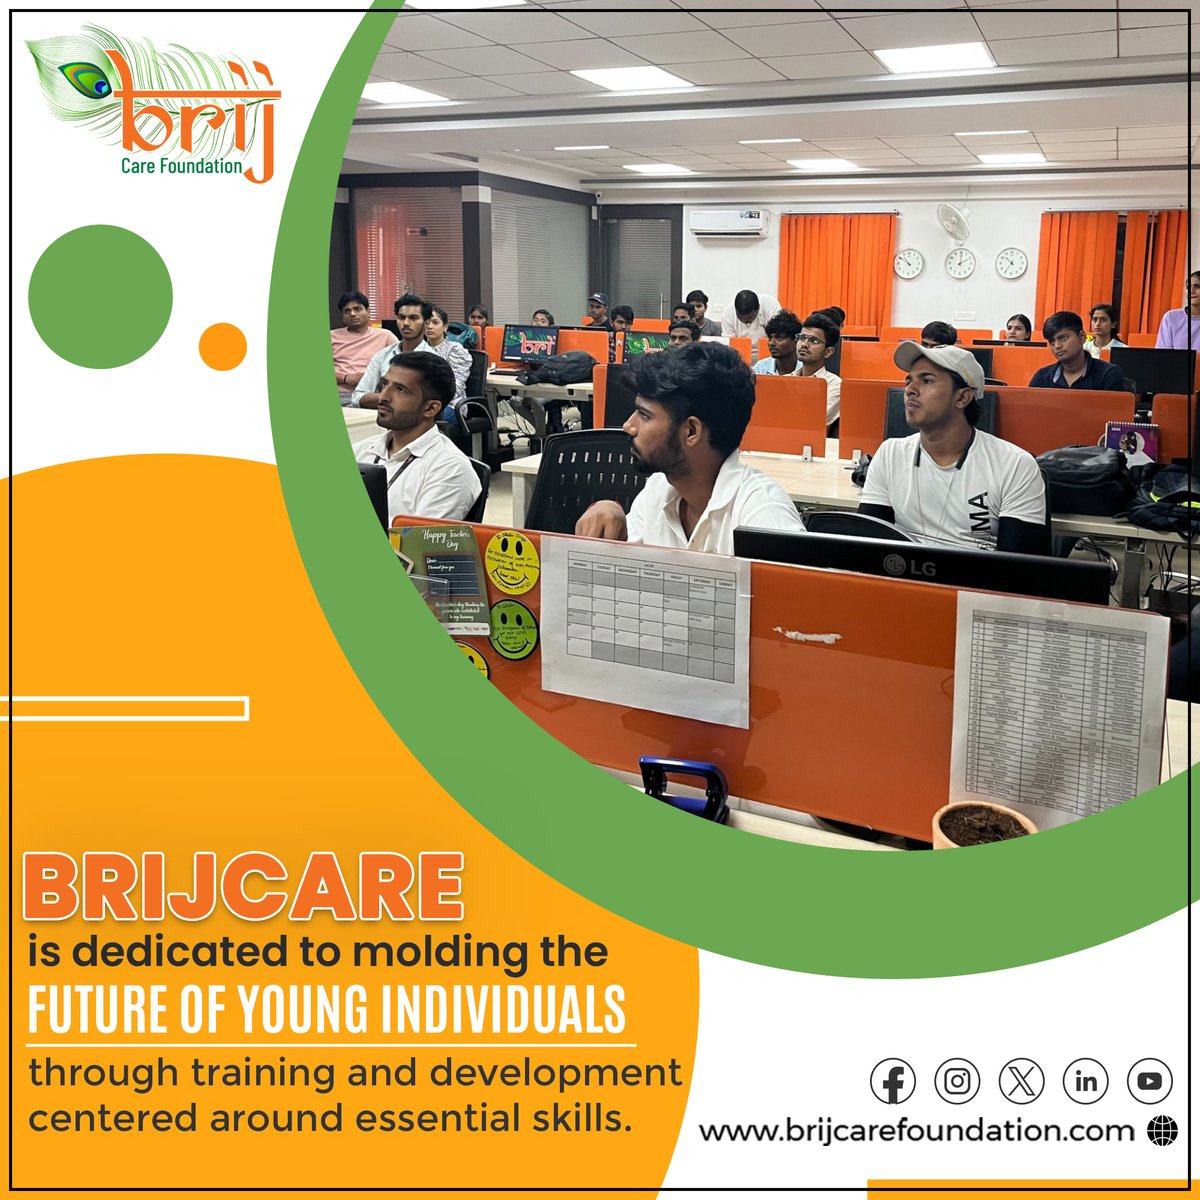 'Nurturing Futures: Empowering Young Minds through Essential Skills Training and Development at BRIJCARE.'

#SkillMoldingForFuture  #EmpowerYouthSkills #YouthDevelopmentJourney #FutureSkillsBuilders #EmpoweringTomorrow #SkillfulYouthPathway #NurturingPotential #brijcare